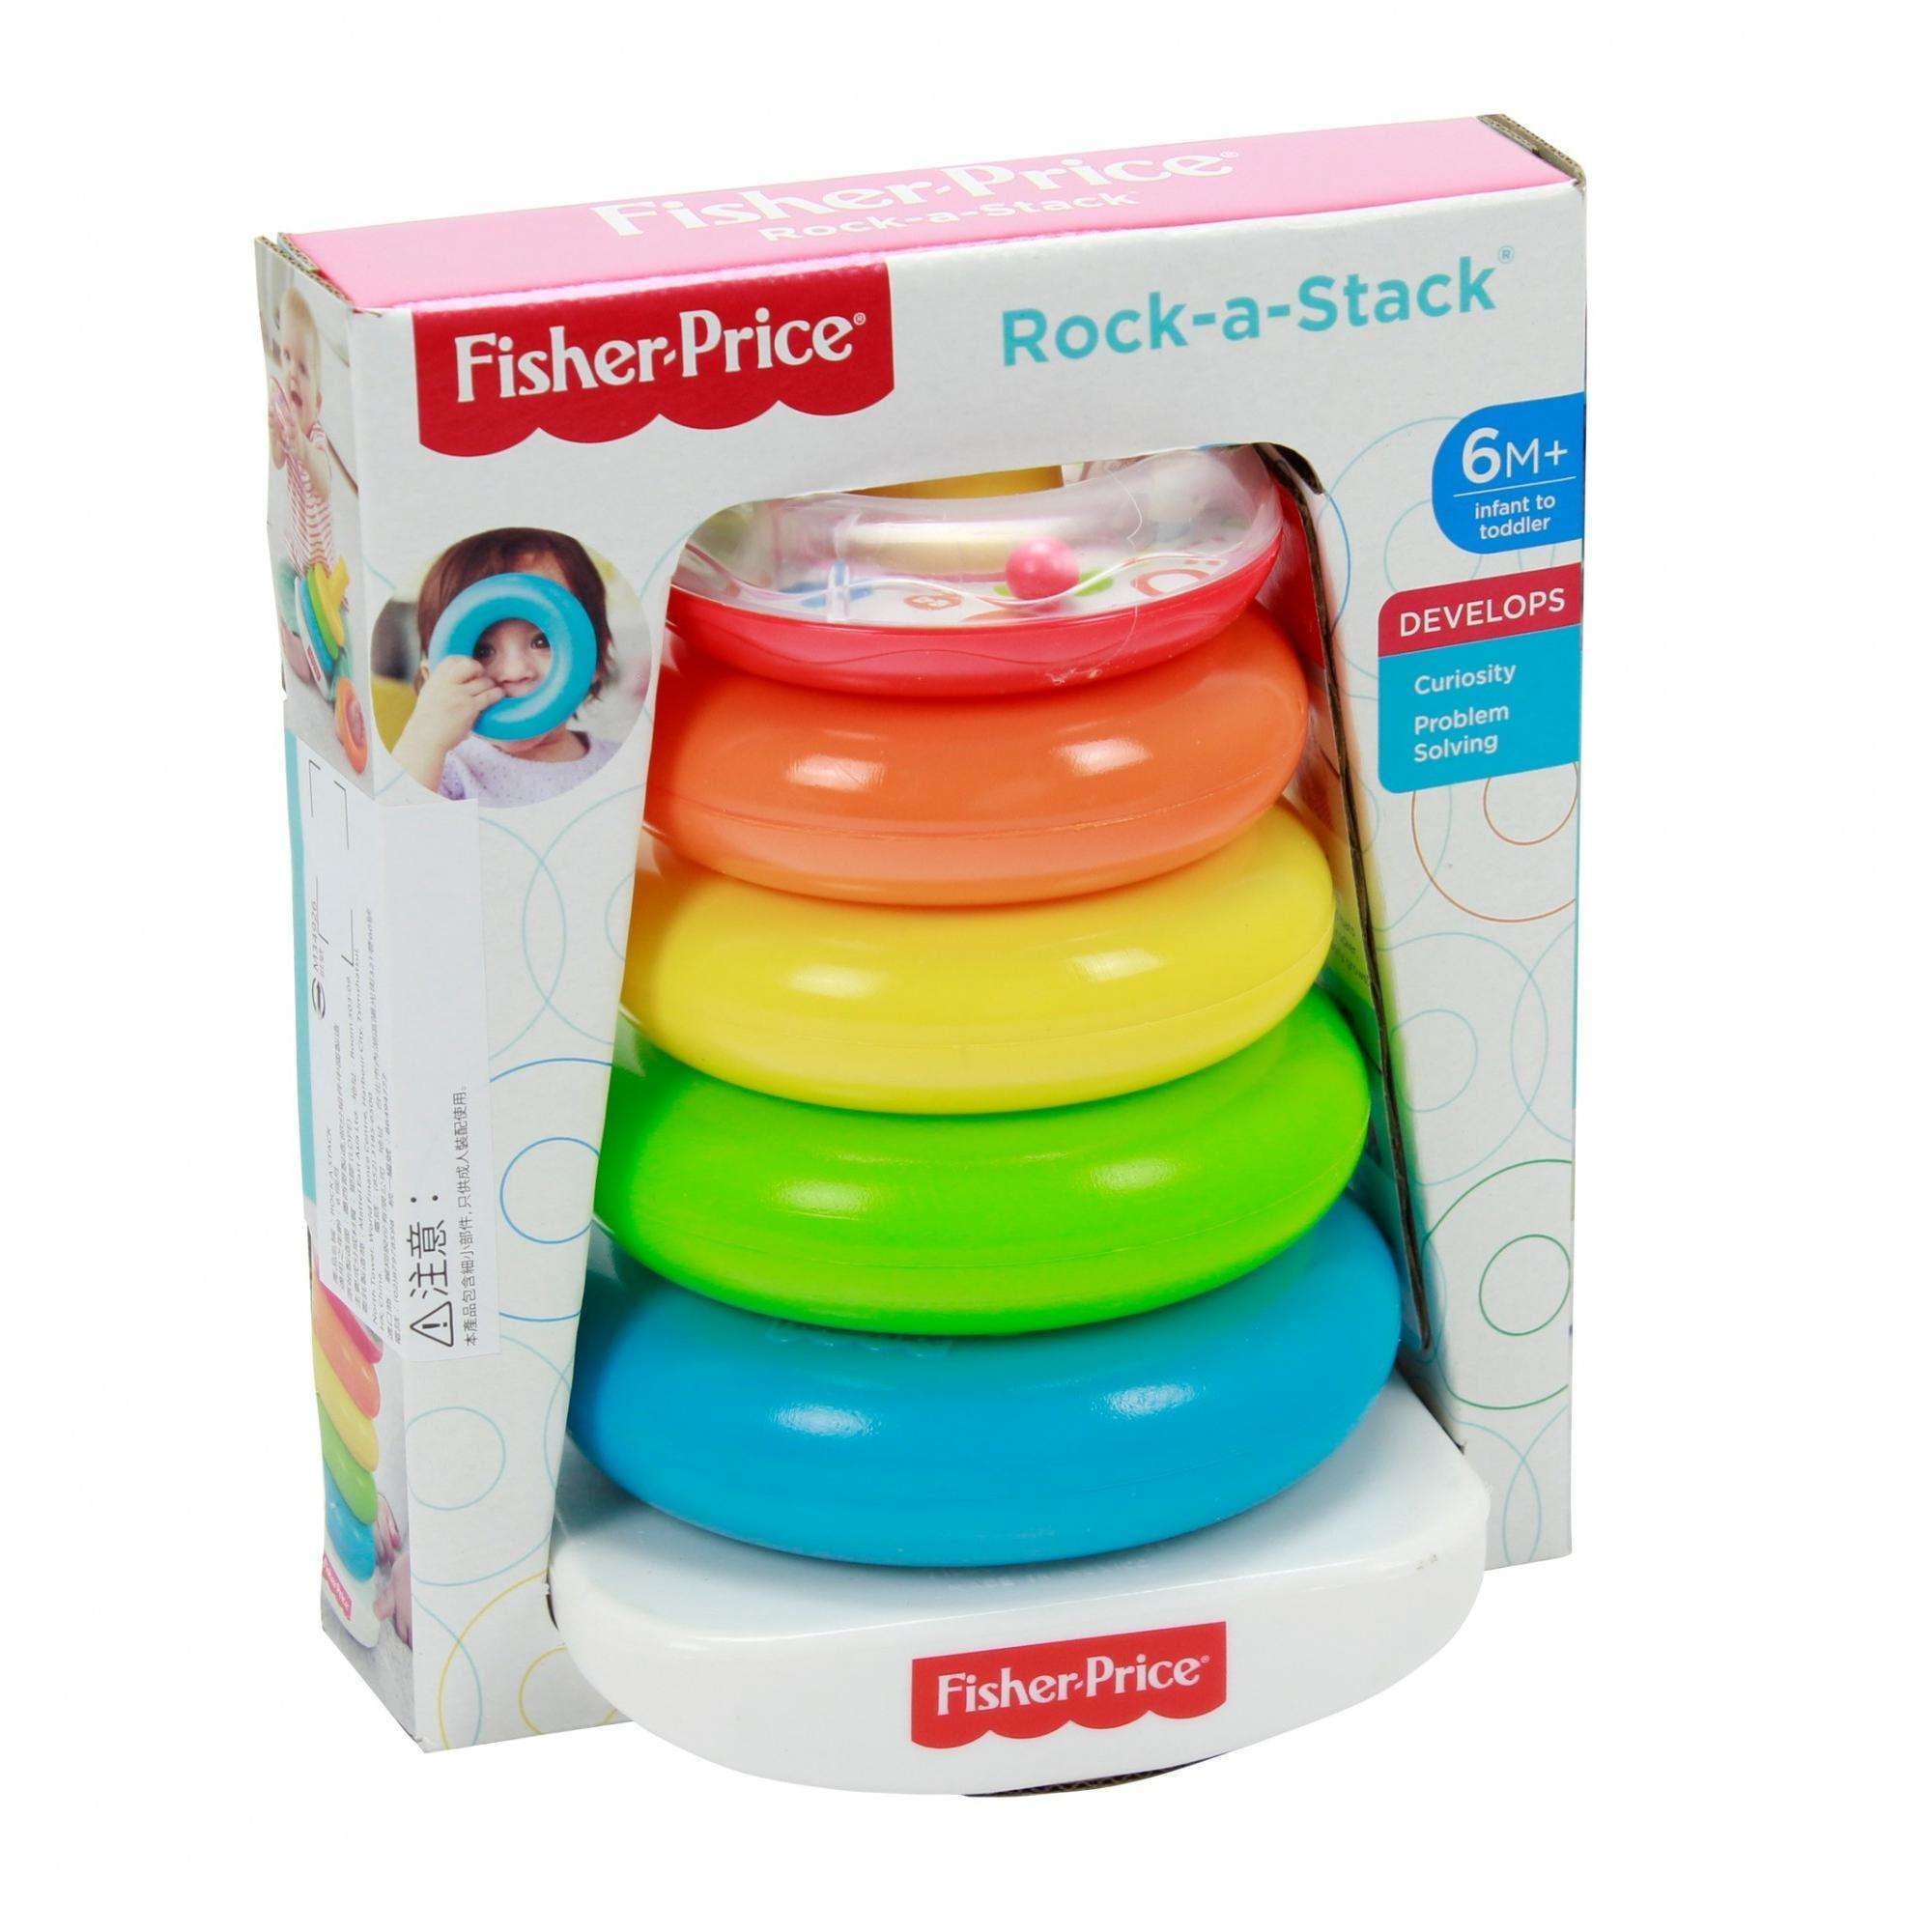 fisher price ring tower